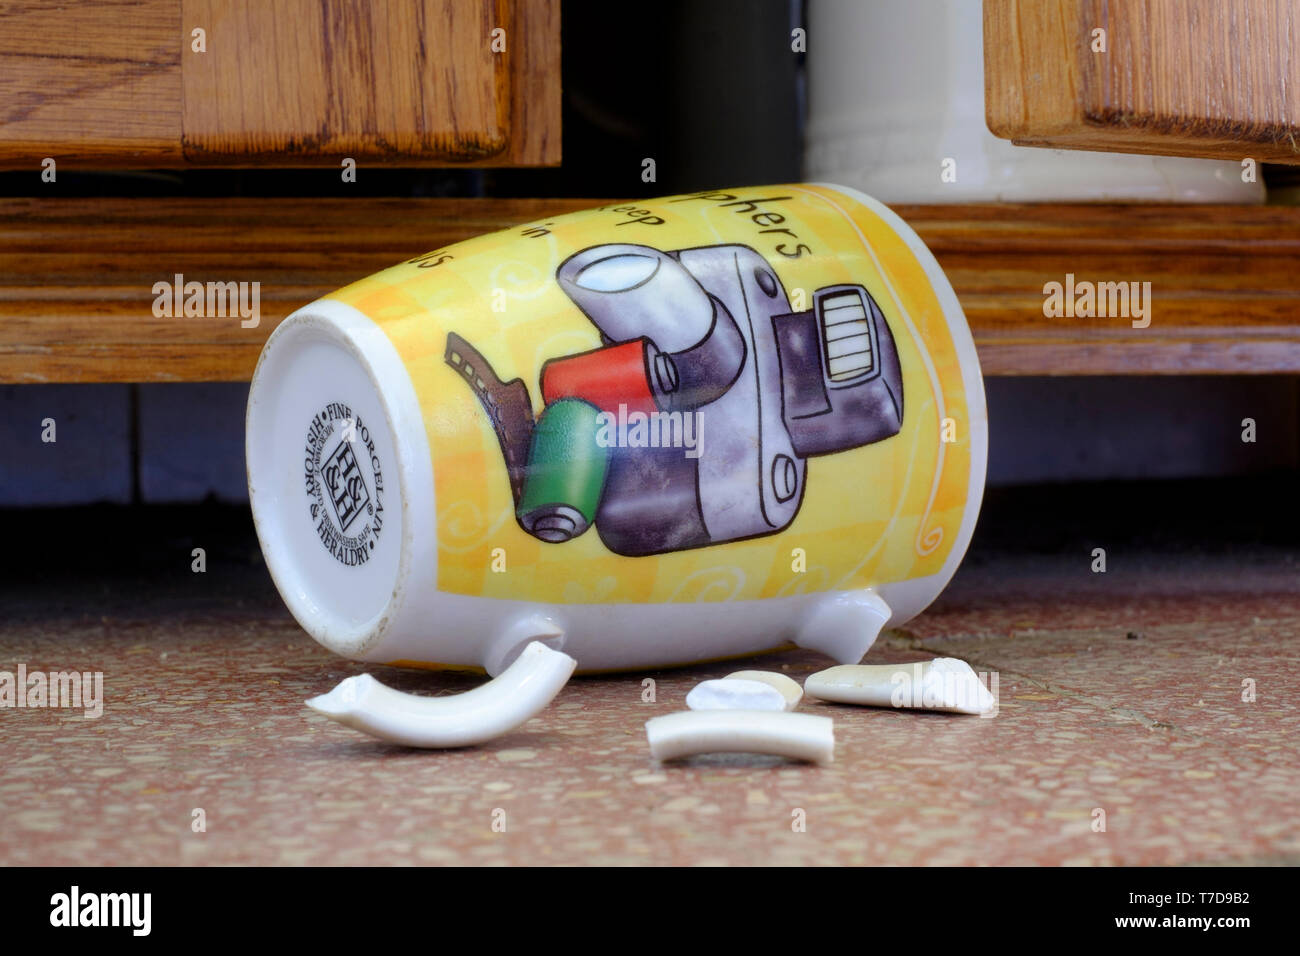 photographers coffee mug laying on tiled floor with broken handle after falling out of cupboard concept lack of focus Stock Photo